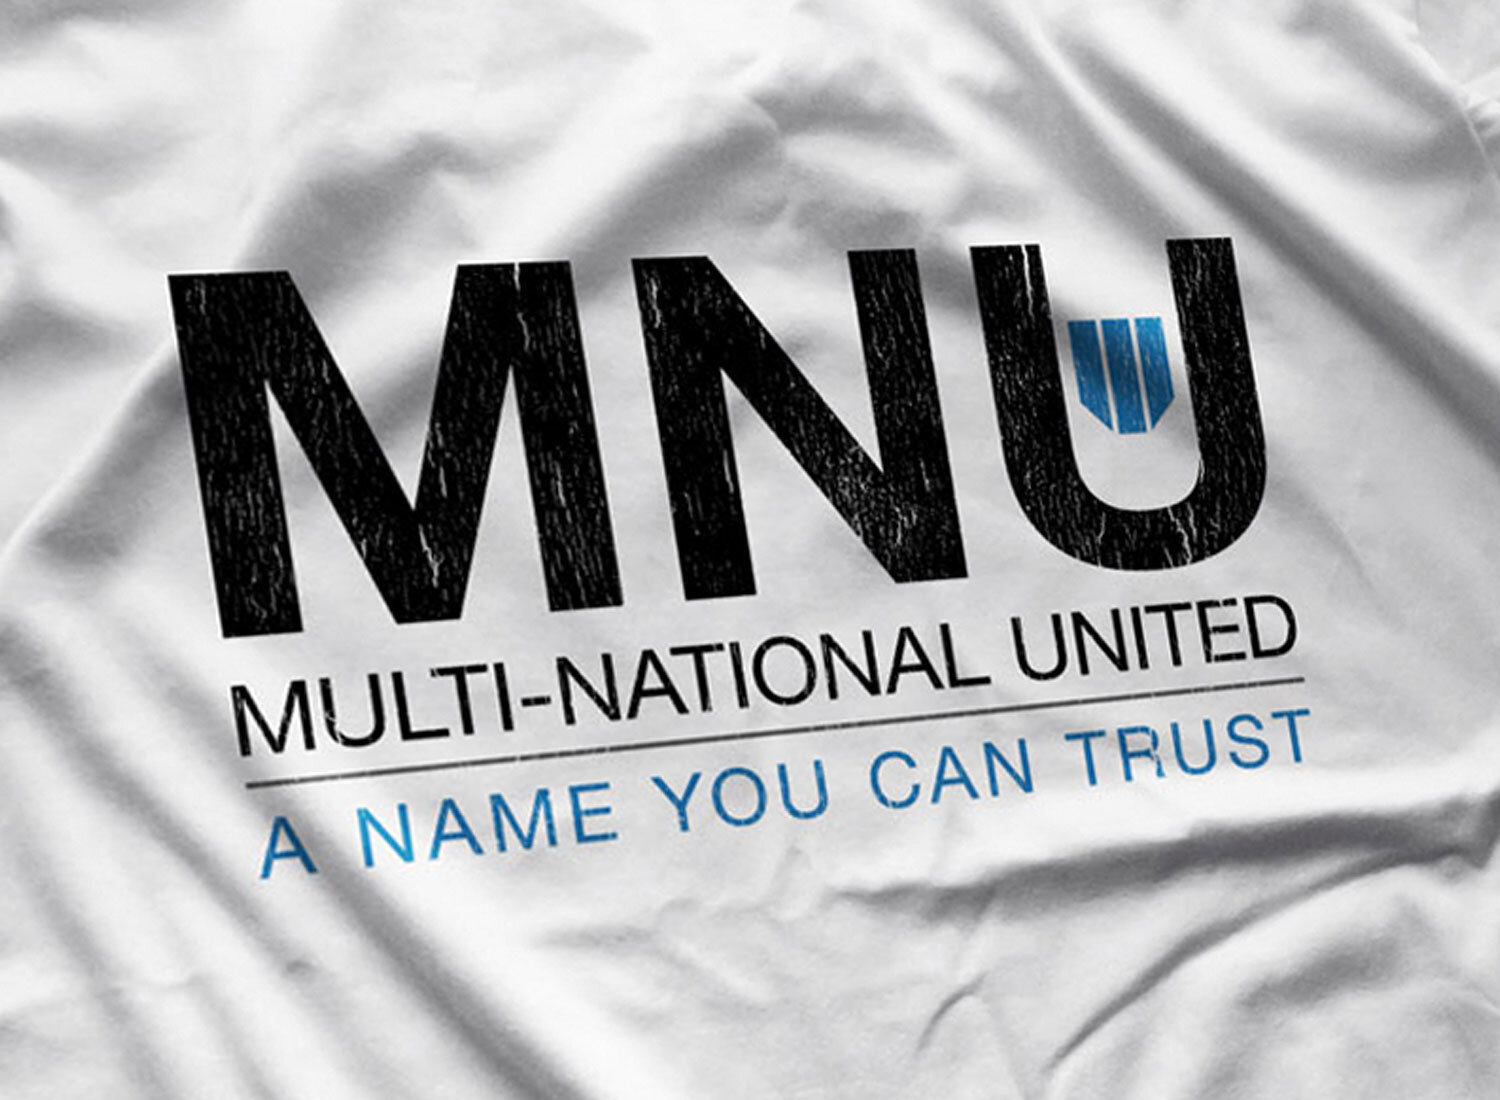 multi-national united spreads lies T-shirt based on the film District 9 MNU 1